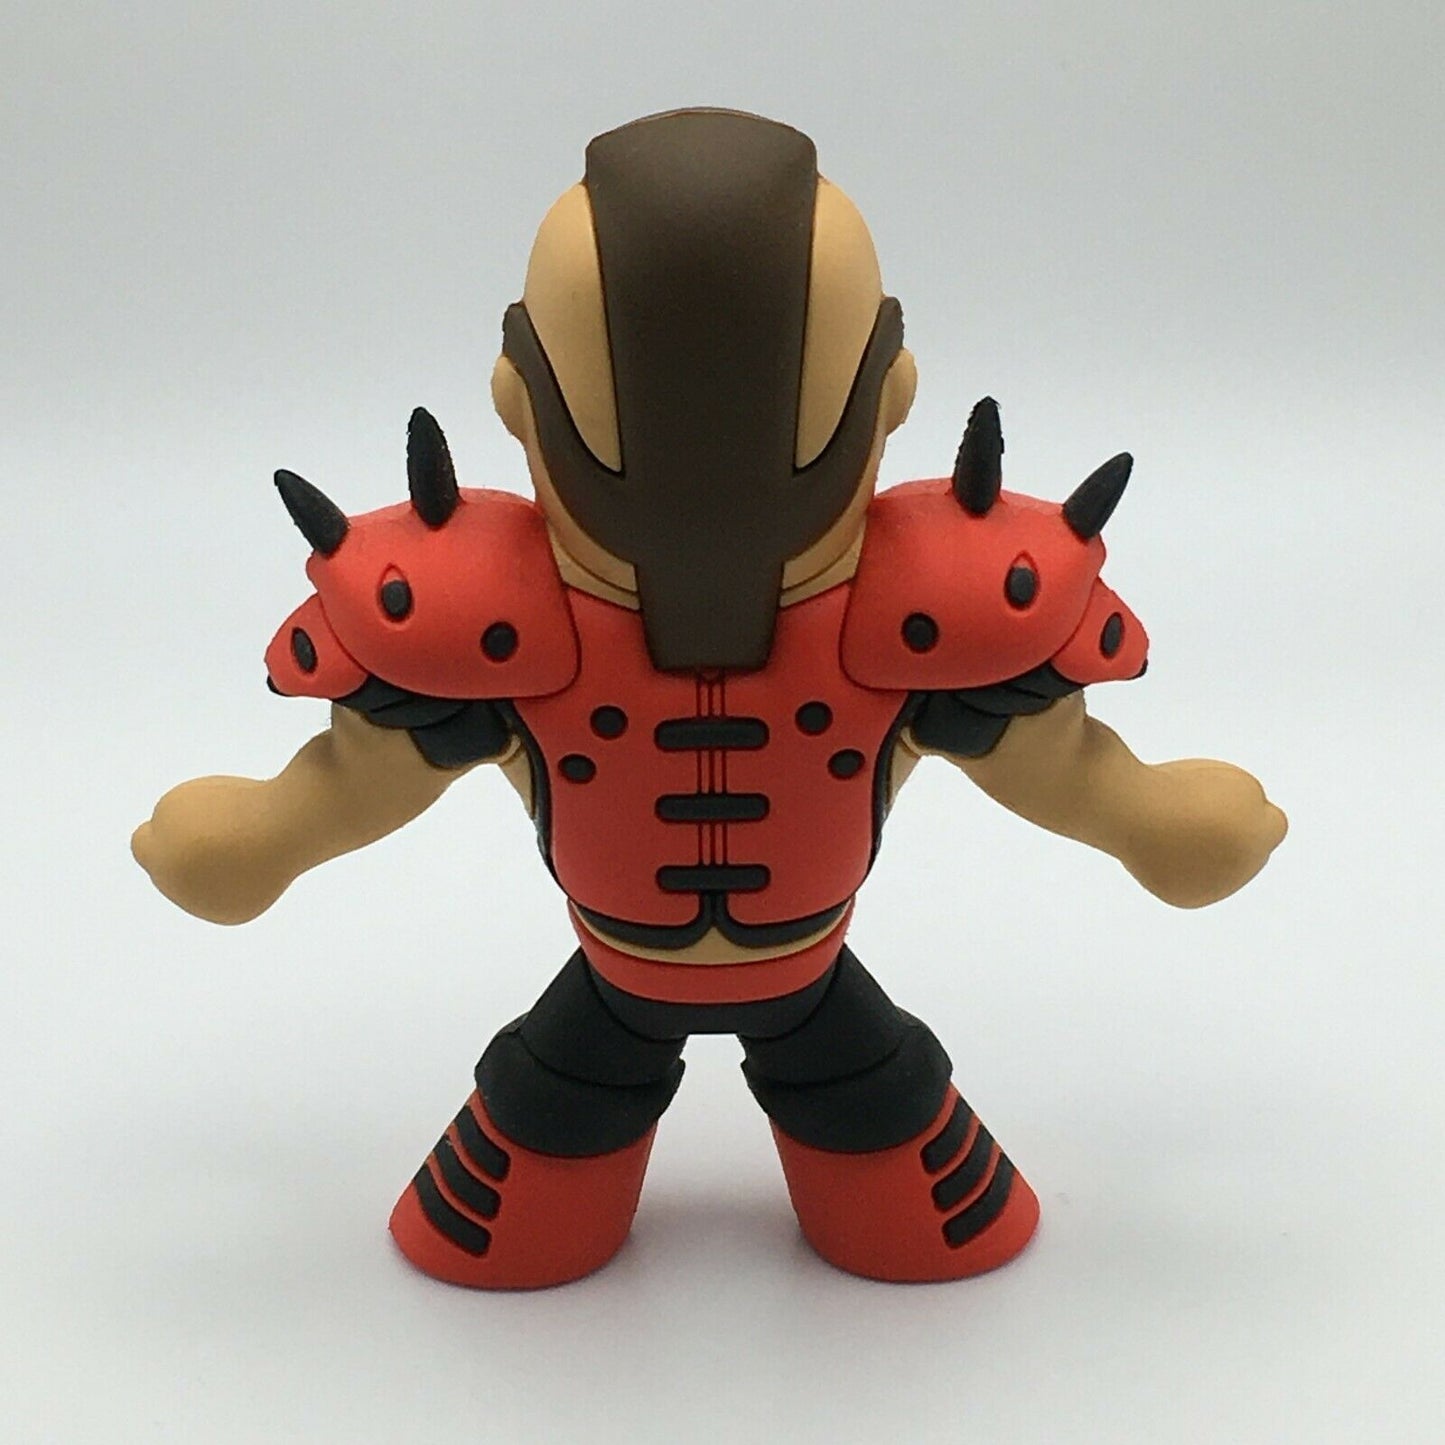 2018 Pro Wrestling Tees Crate Exclusive Micro Brawlers Road Warrior Animal [February]